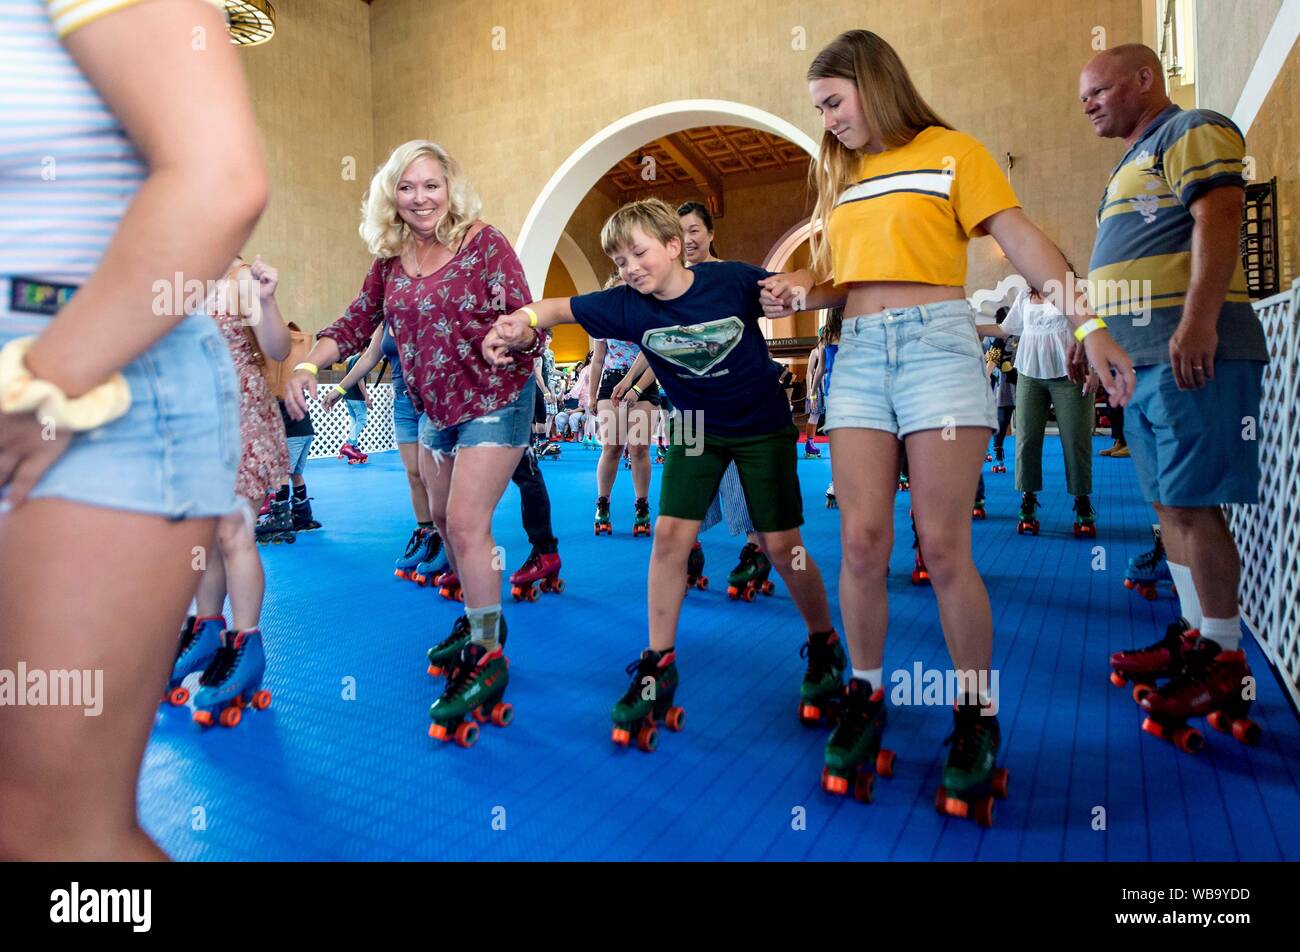 Los Angeles, California, USA. 25th Aug, 2019. A custom-built, pop-up roller rink constructed in historic Union Station's ticket concourse attracts Angelenos for a weekend of roller skating to music from the disco era. Credit: Brian Cahn/ZUMA Wire/Alamy Live News Stock Photo